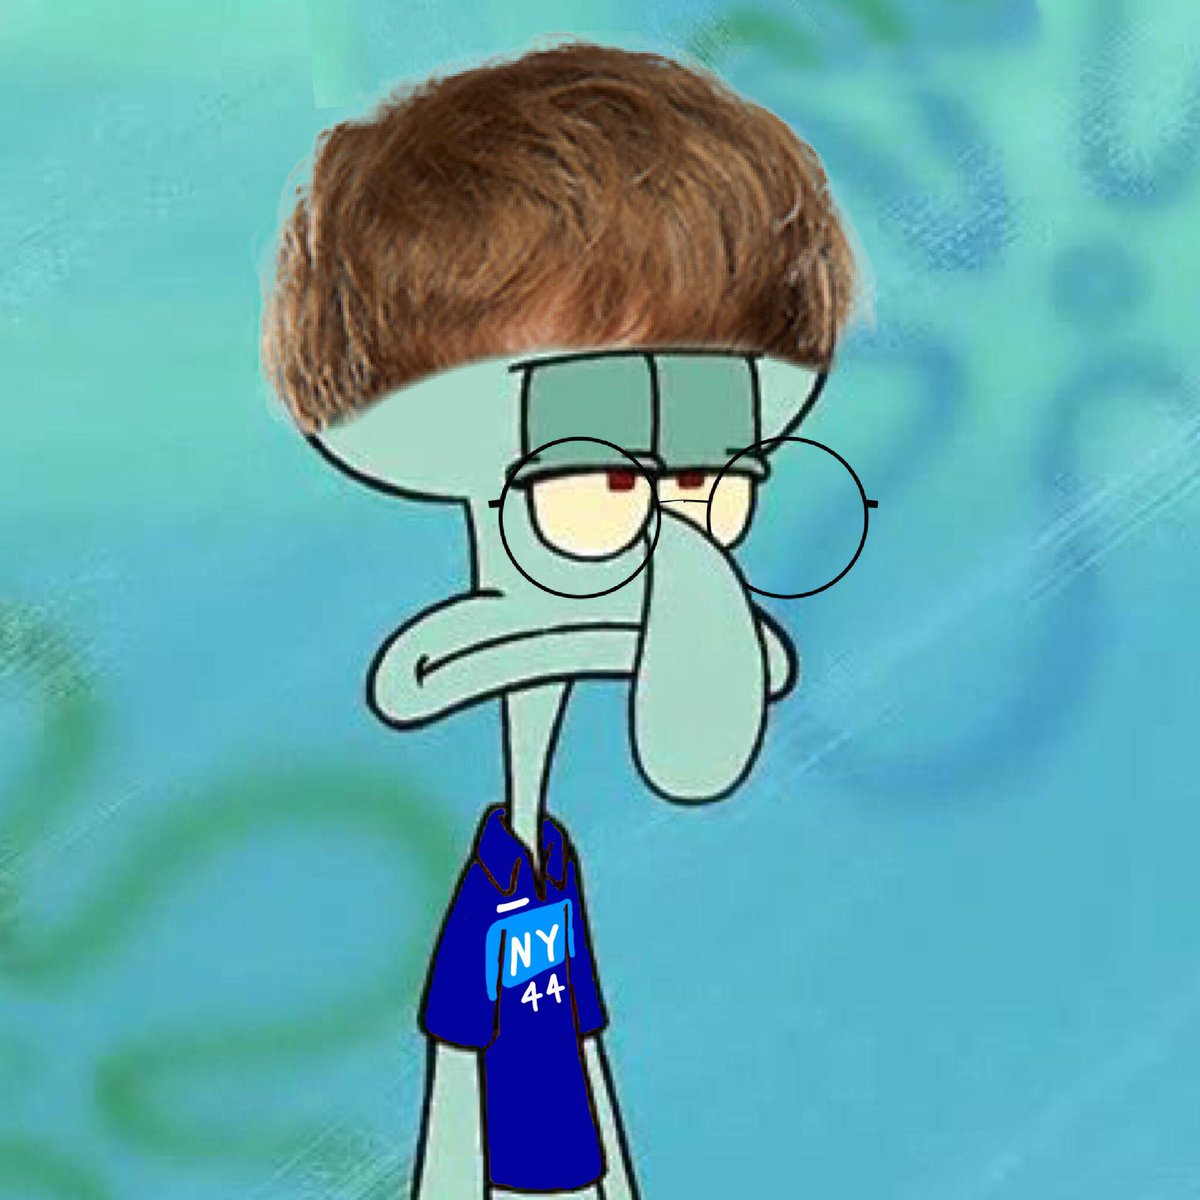 then I would say JJoNak is Squidward because JJoNak means an Octopus, so is...